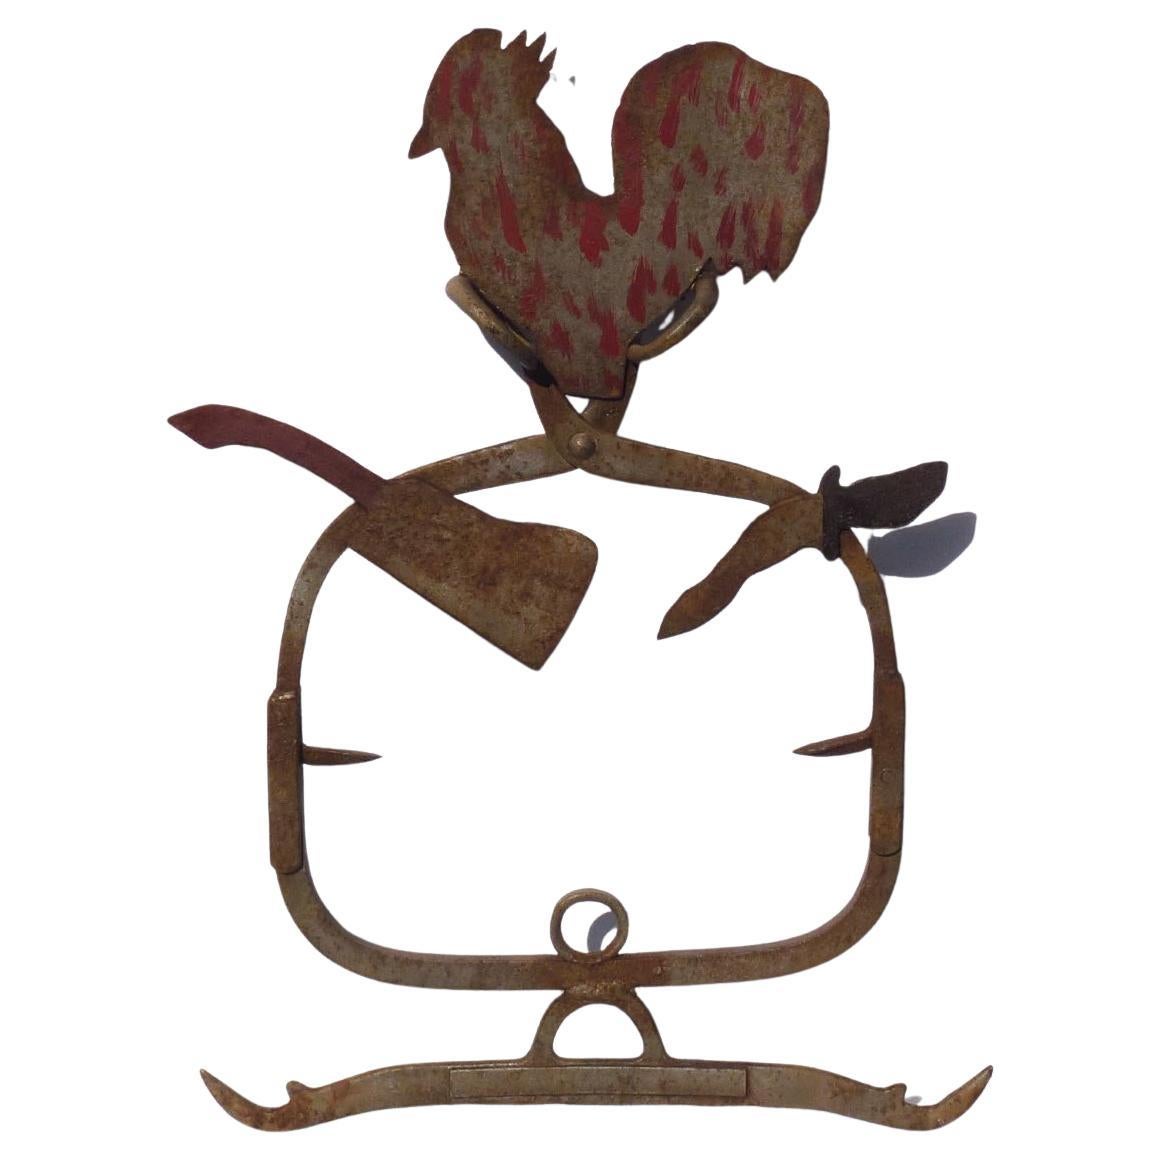 Butcher's Trade Sign: Metal Tools, Found Objects, Ice Tongs, with Rooster on Top